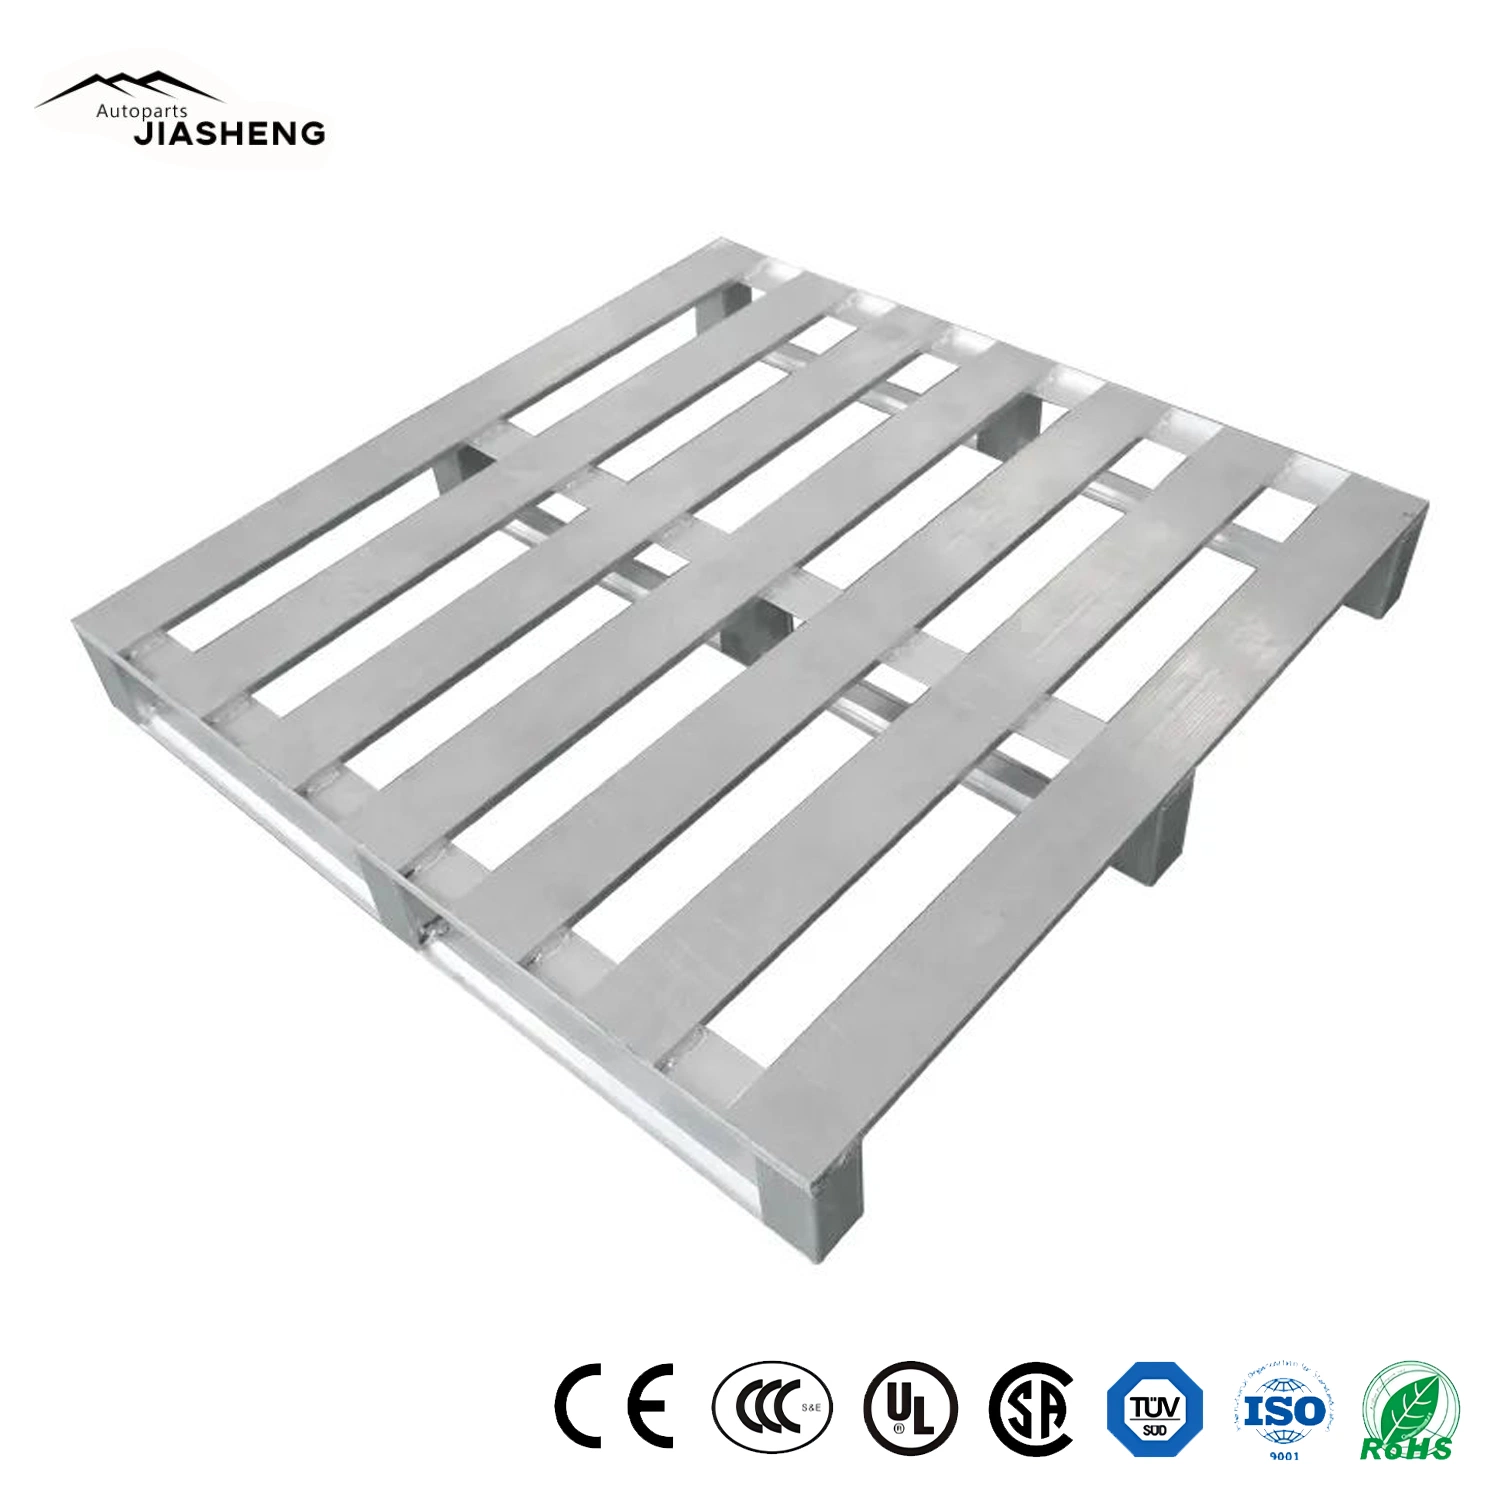 China Heavy Duty Stacking Racking System Injection Warehouse Storage Aluminium Pallet Sell Well